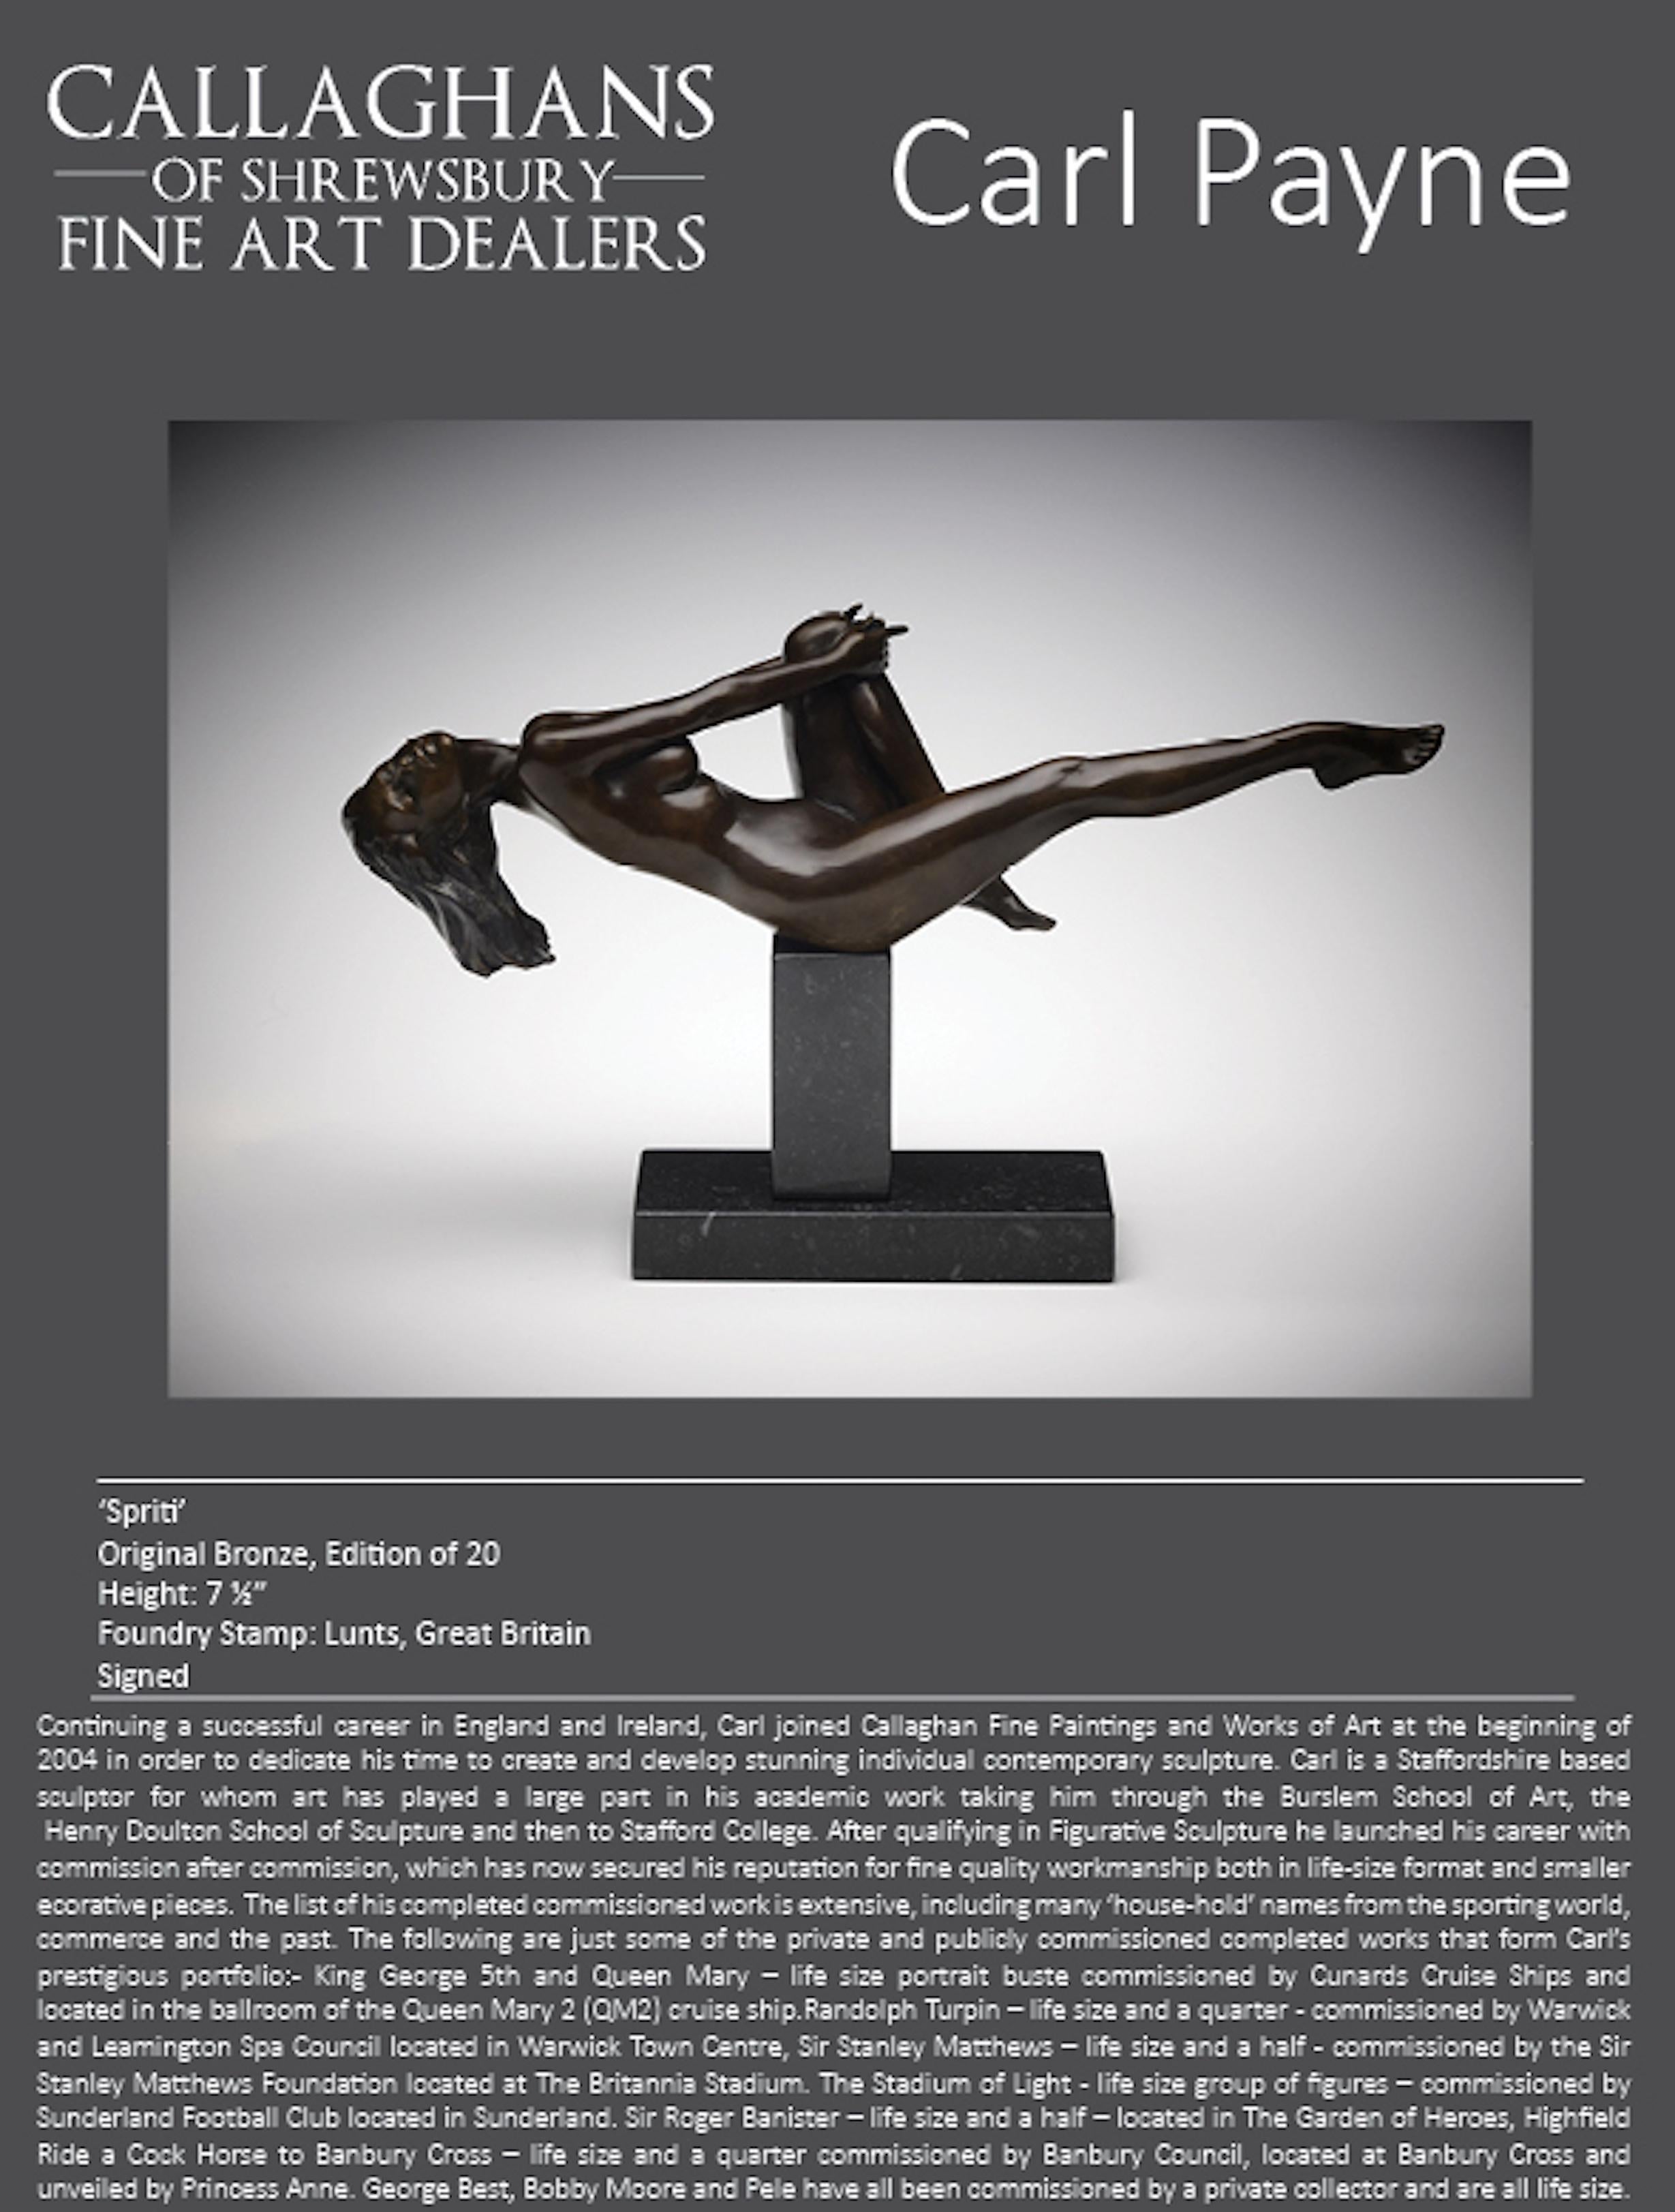 Contemporary Reclining Bronze Nude Figurative Sculpture 'Spirit' by Carl Payne For Sale 3